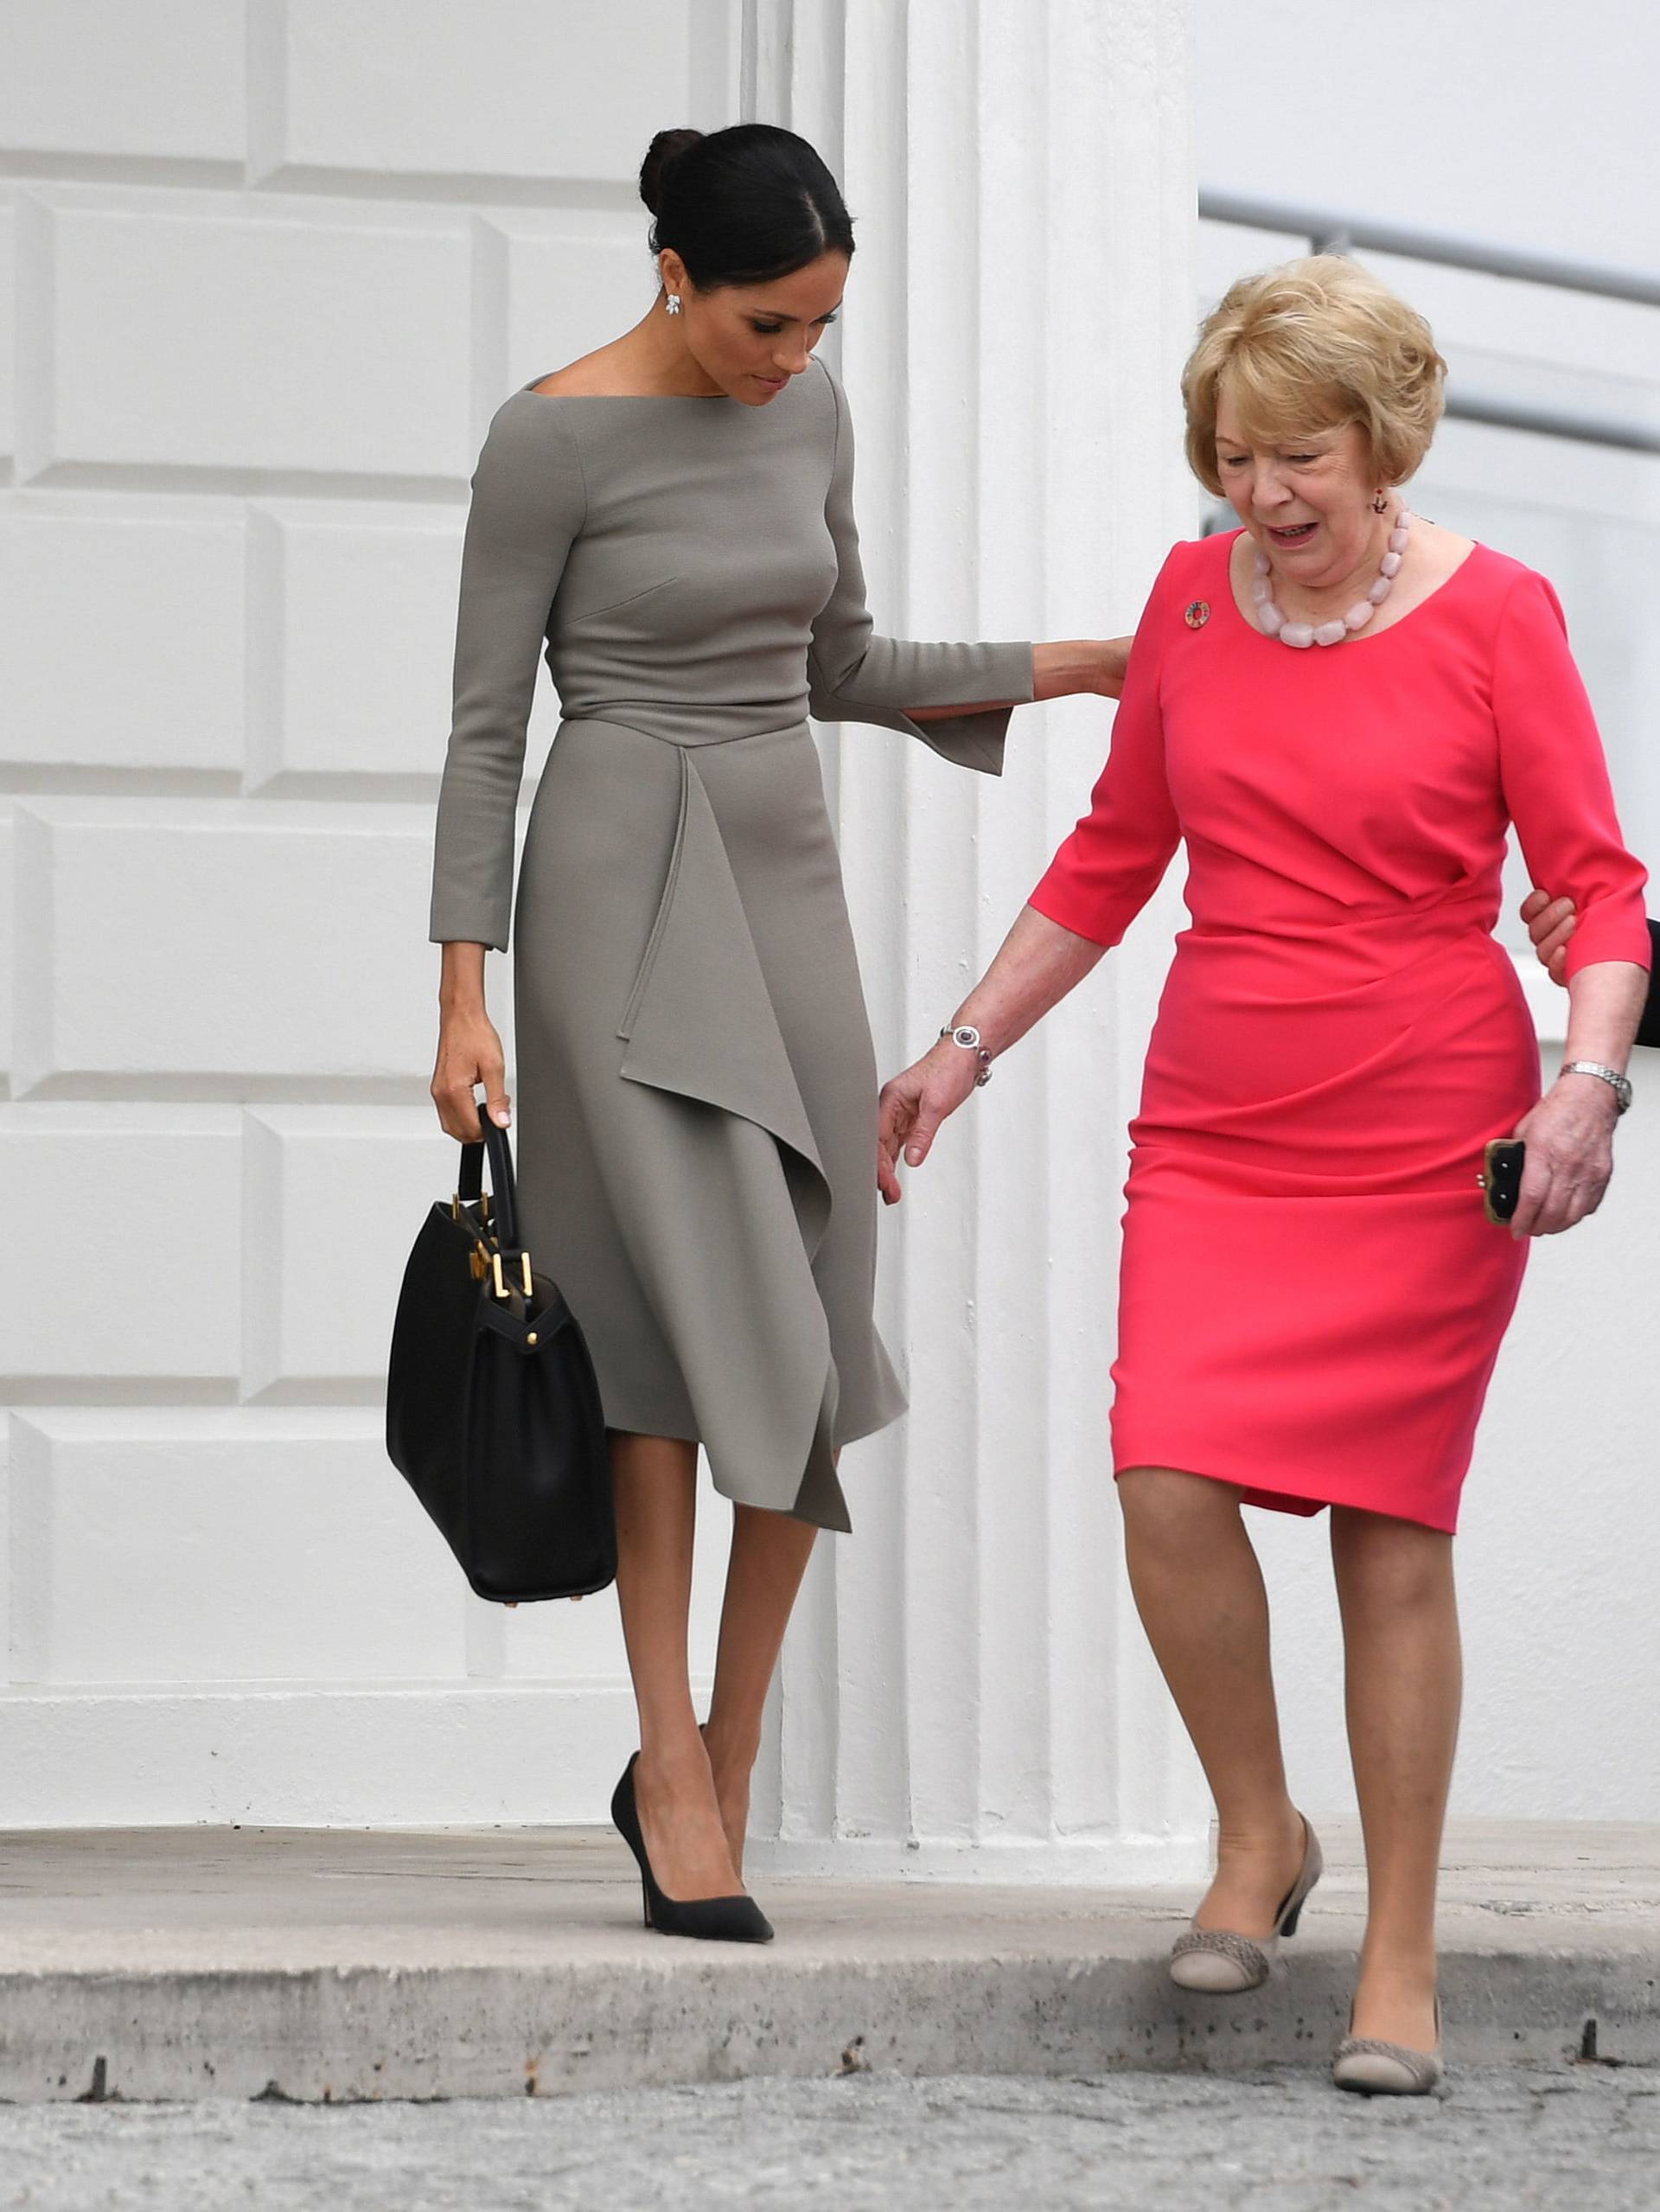 Royal visit to Dublin - Day Two